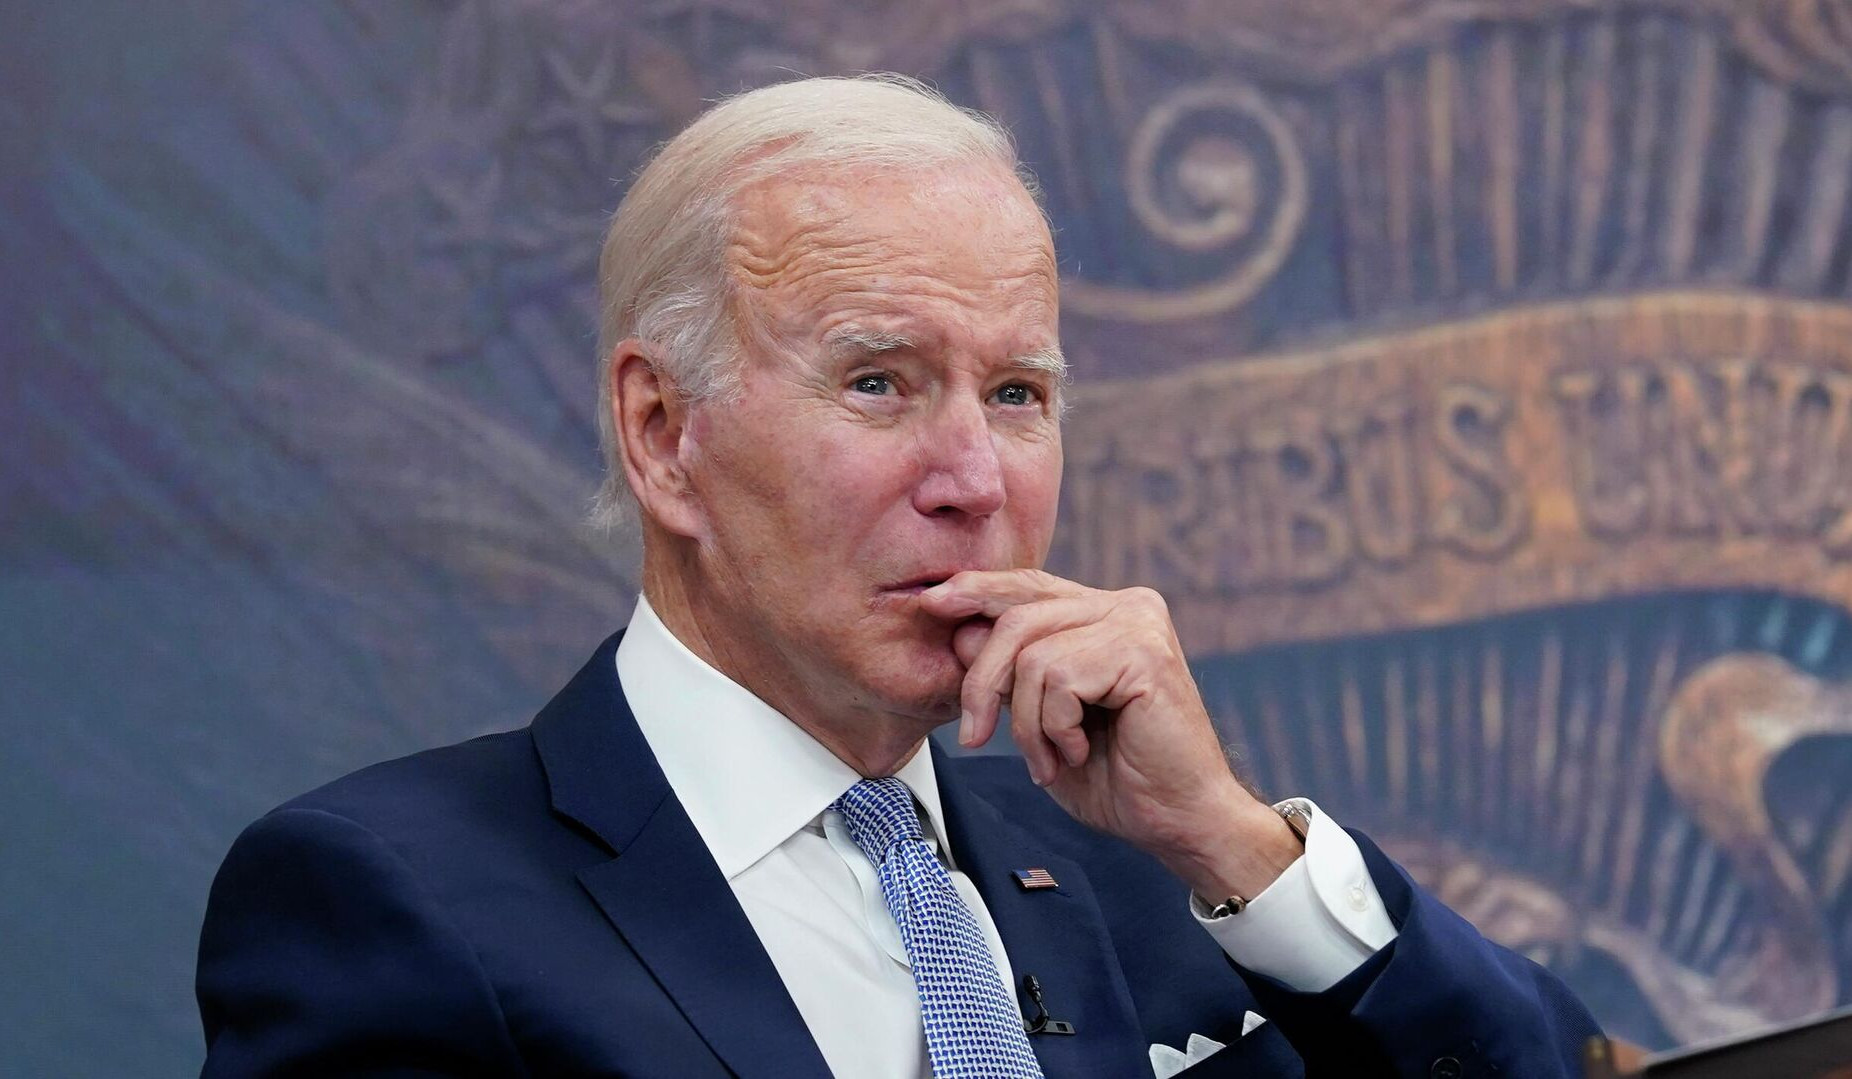 Biden says Putin committed war crimes, calls charges justified